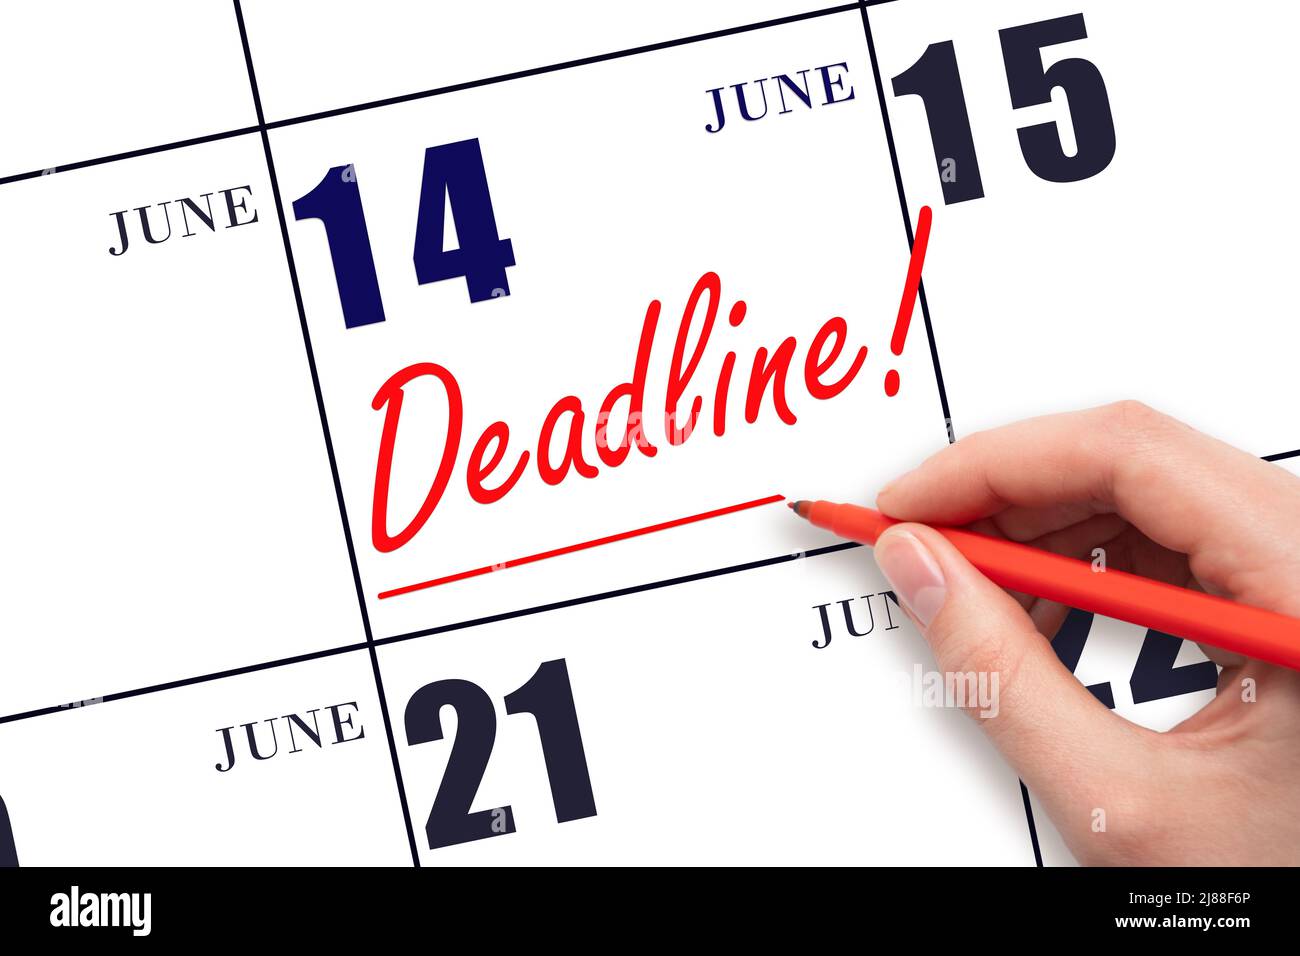 14th day of June. Hand drawing red line and writing the text Deadline on calendar date June 14. Deadline word written on calendar Summer month, day of Stock Photo